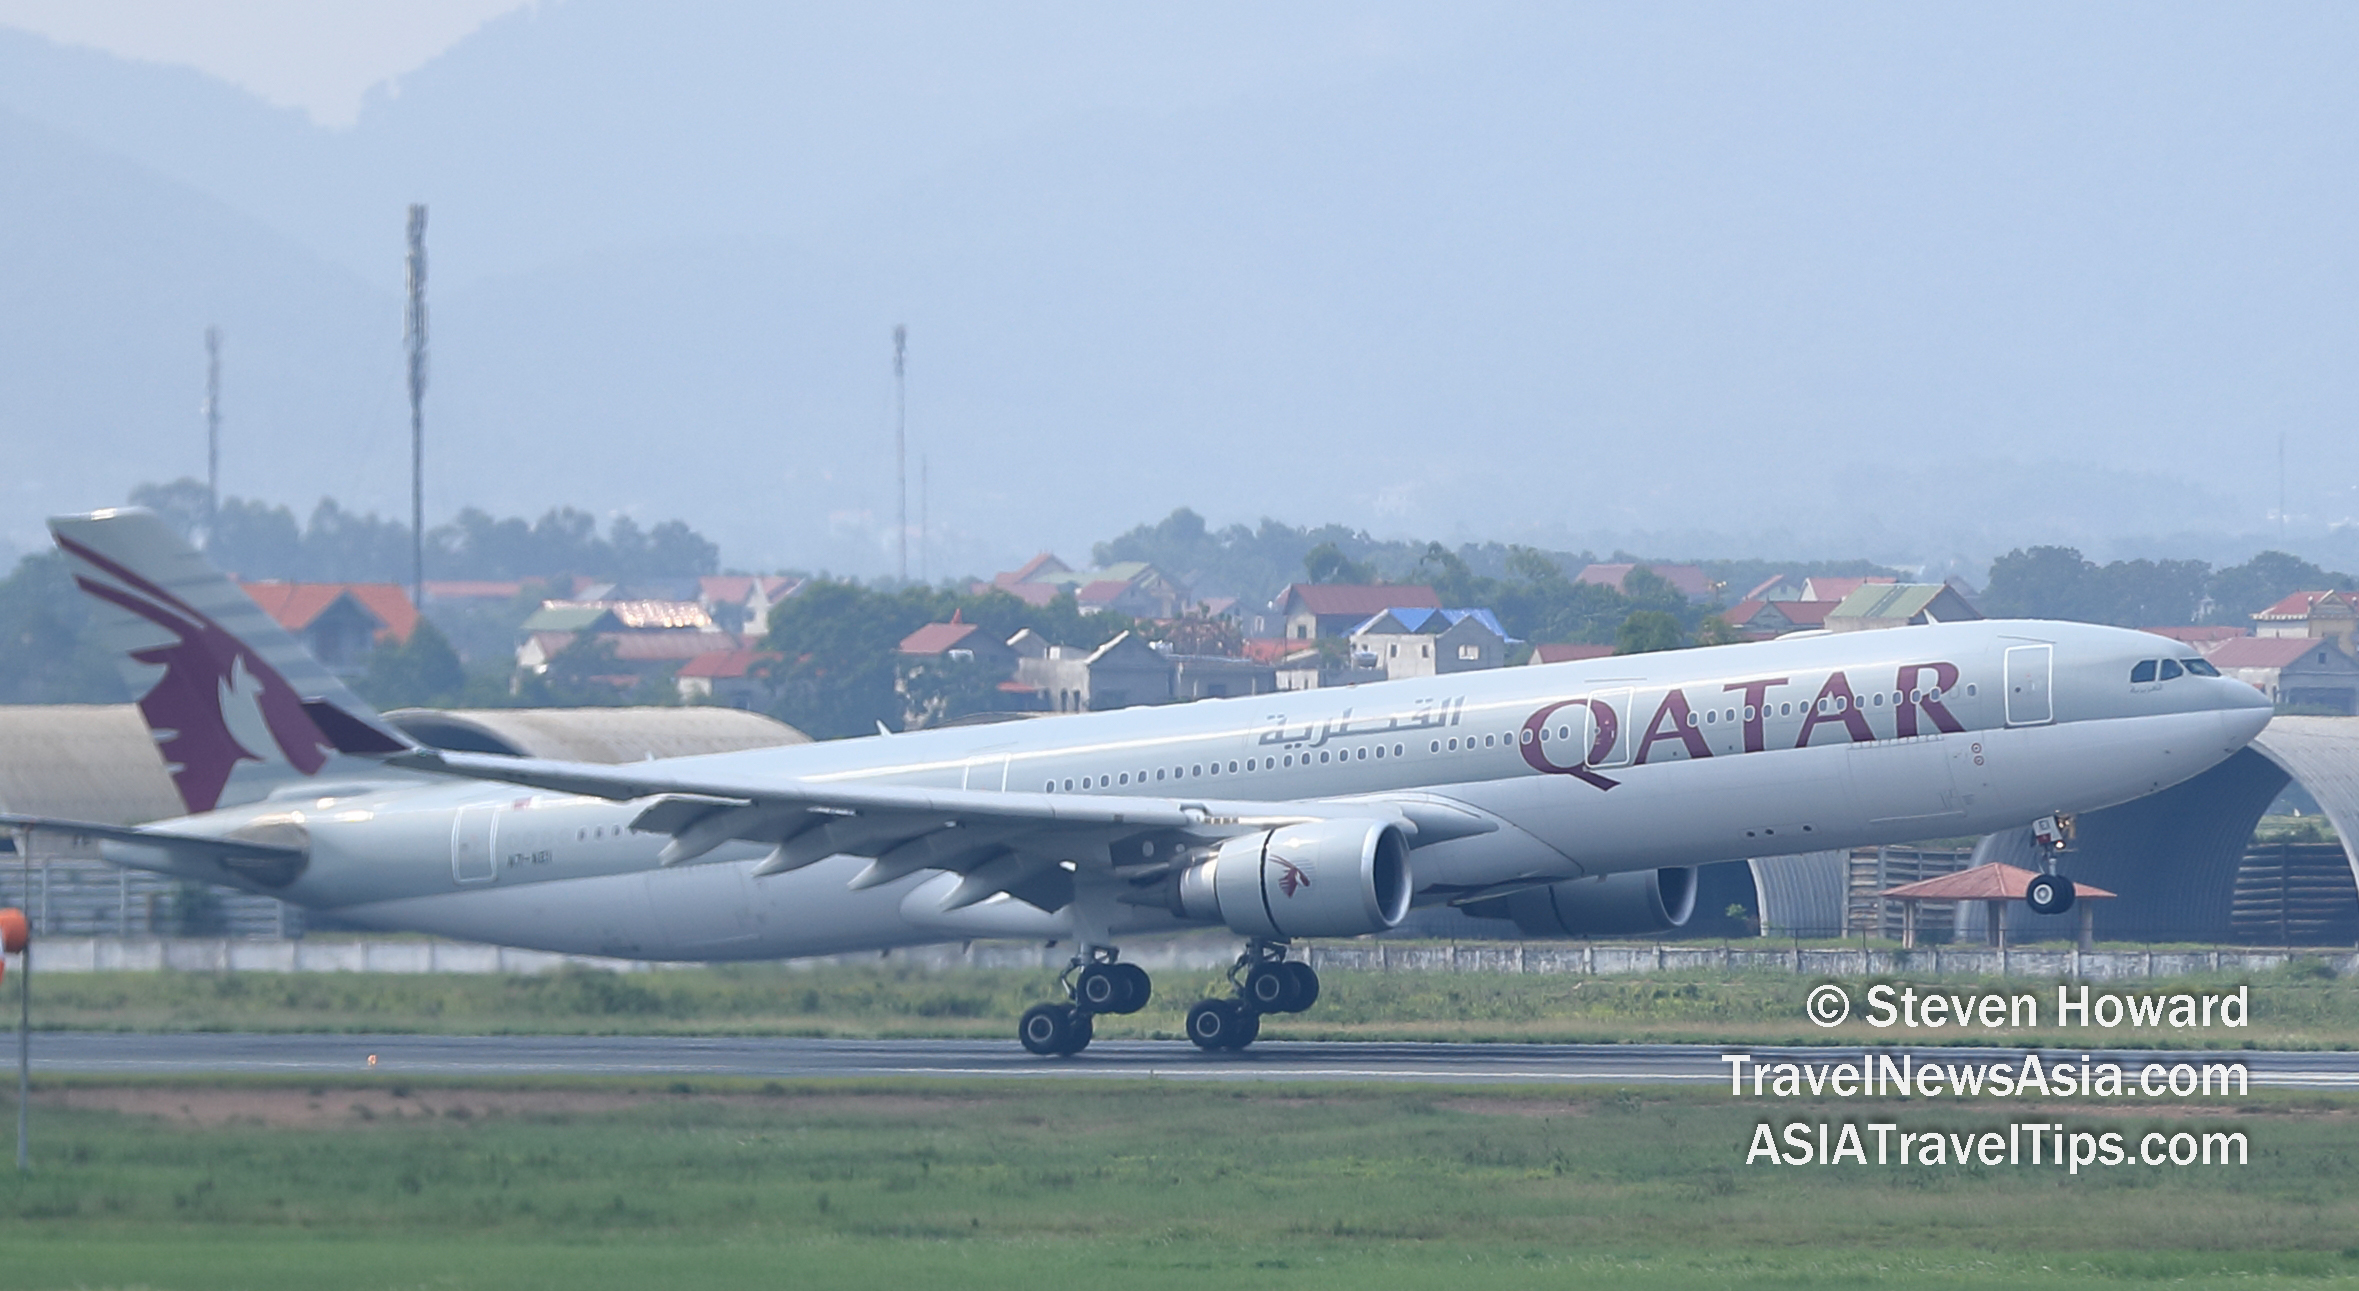 Qatar Airways Airbus A330 reg: A7-AEI. Picture by Steven Howard of TravelNewsAsia.com Click to enlarge.